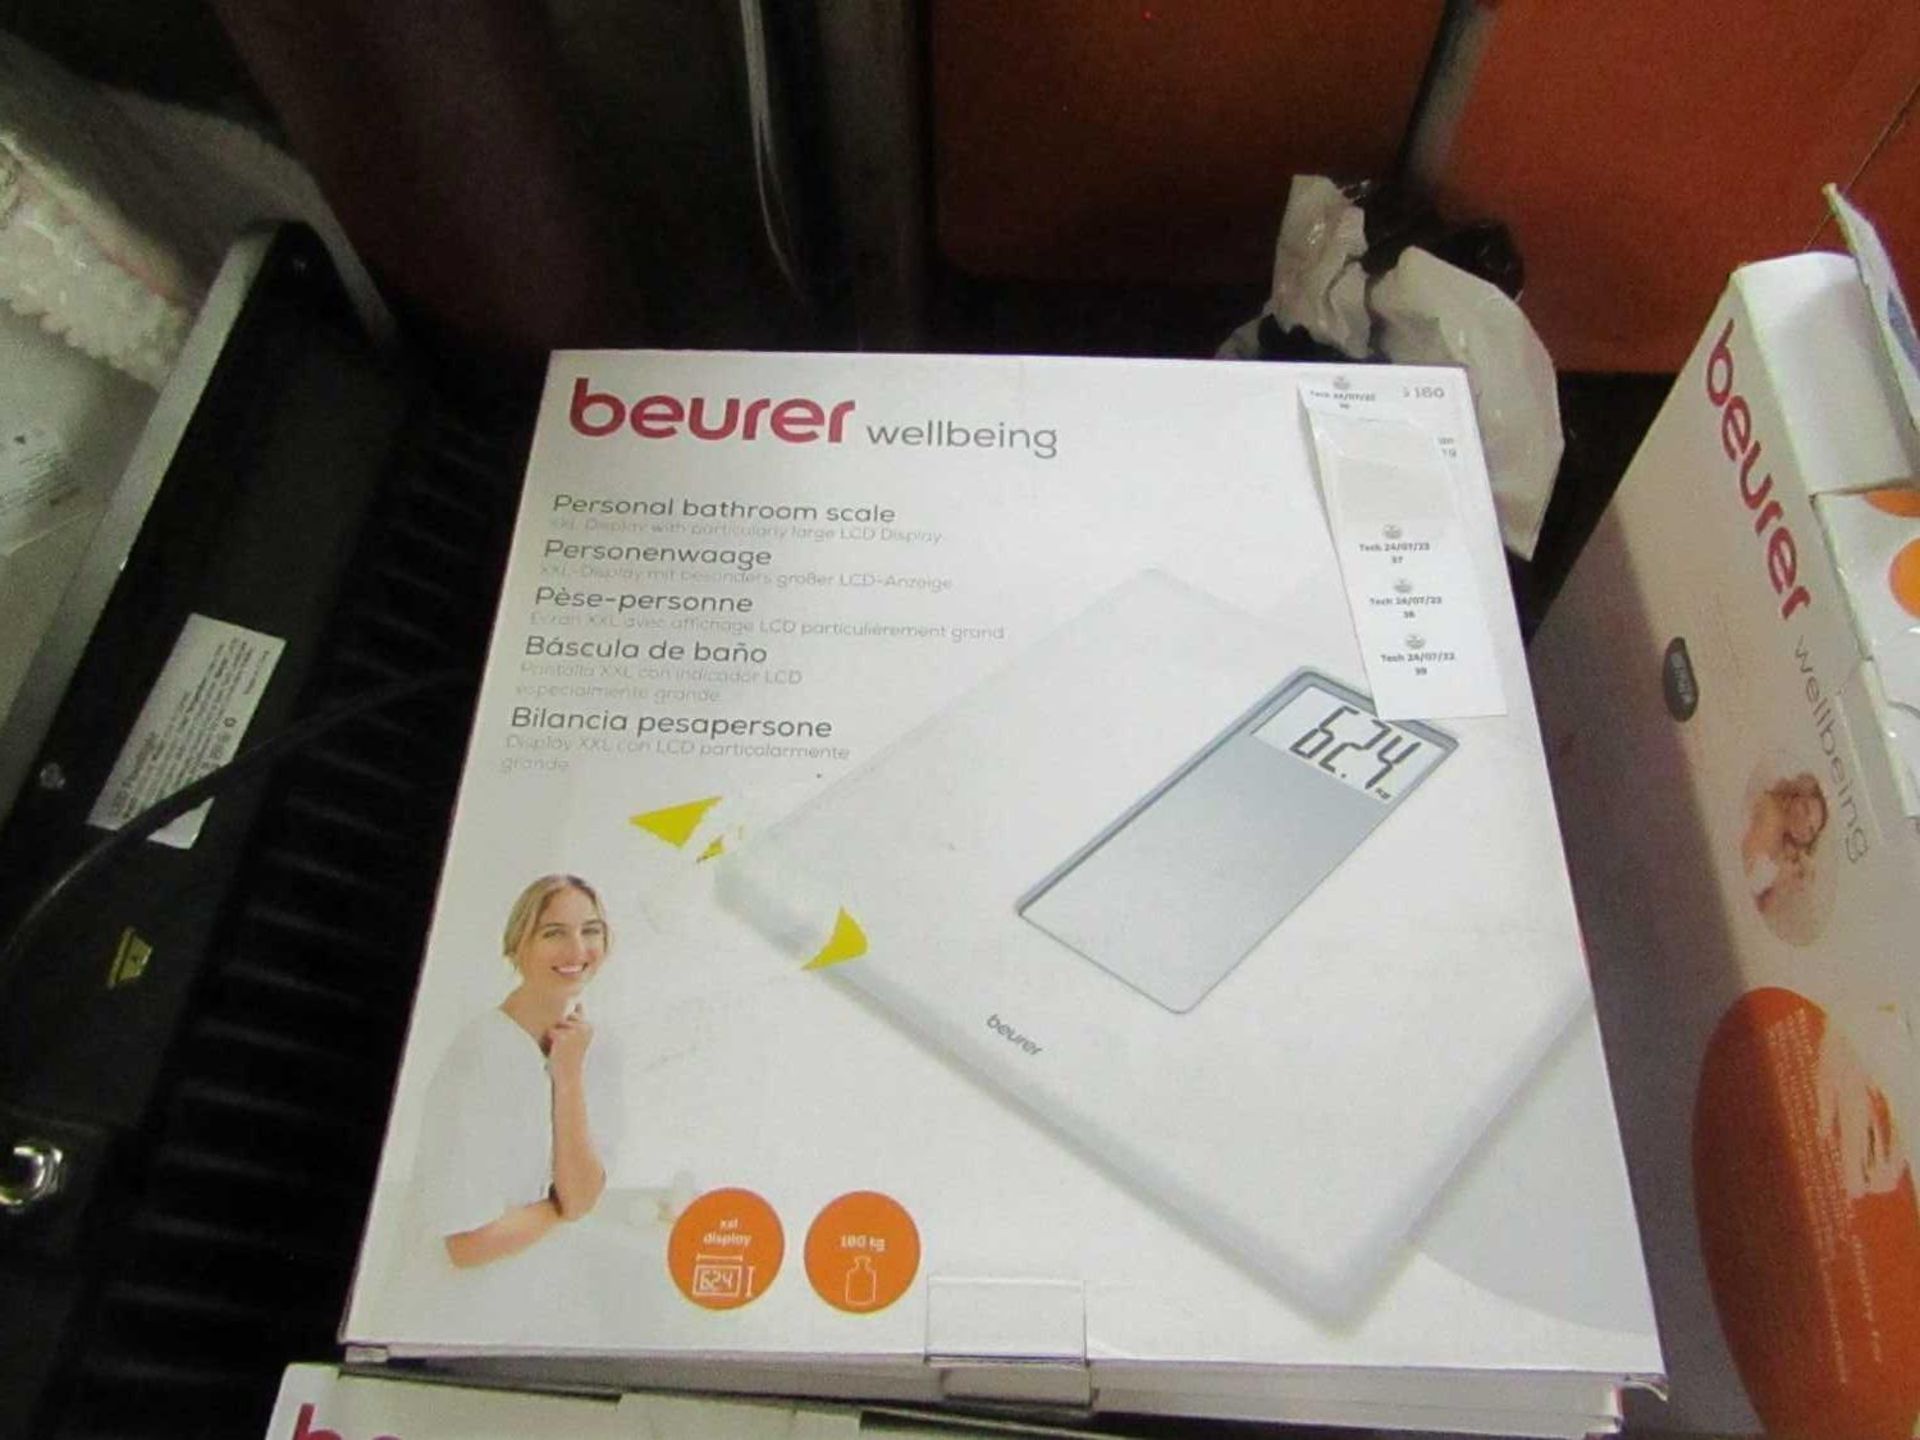 VAT 1x Beurer Wellbeing Personal Bathroom Scales PS160 - This item is graded B - RRP œ25